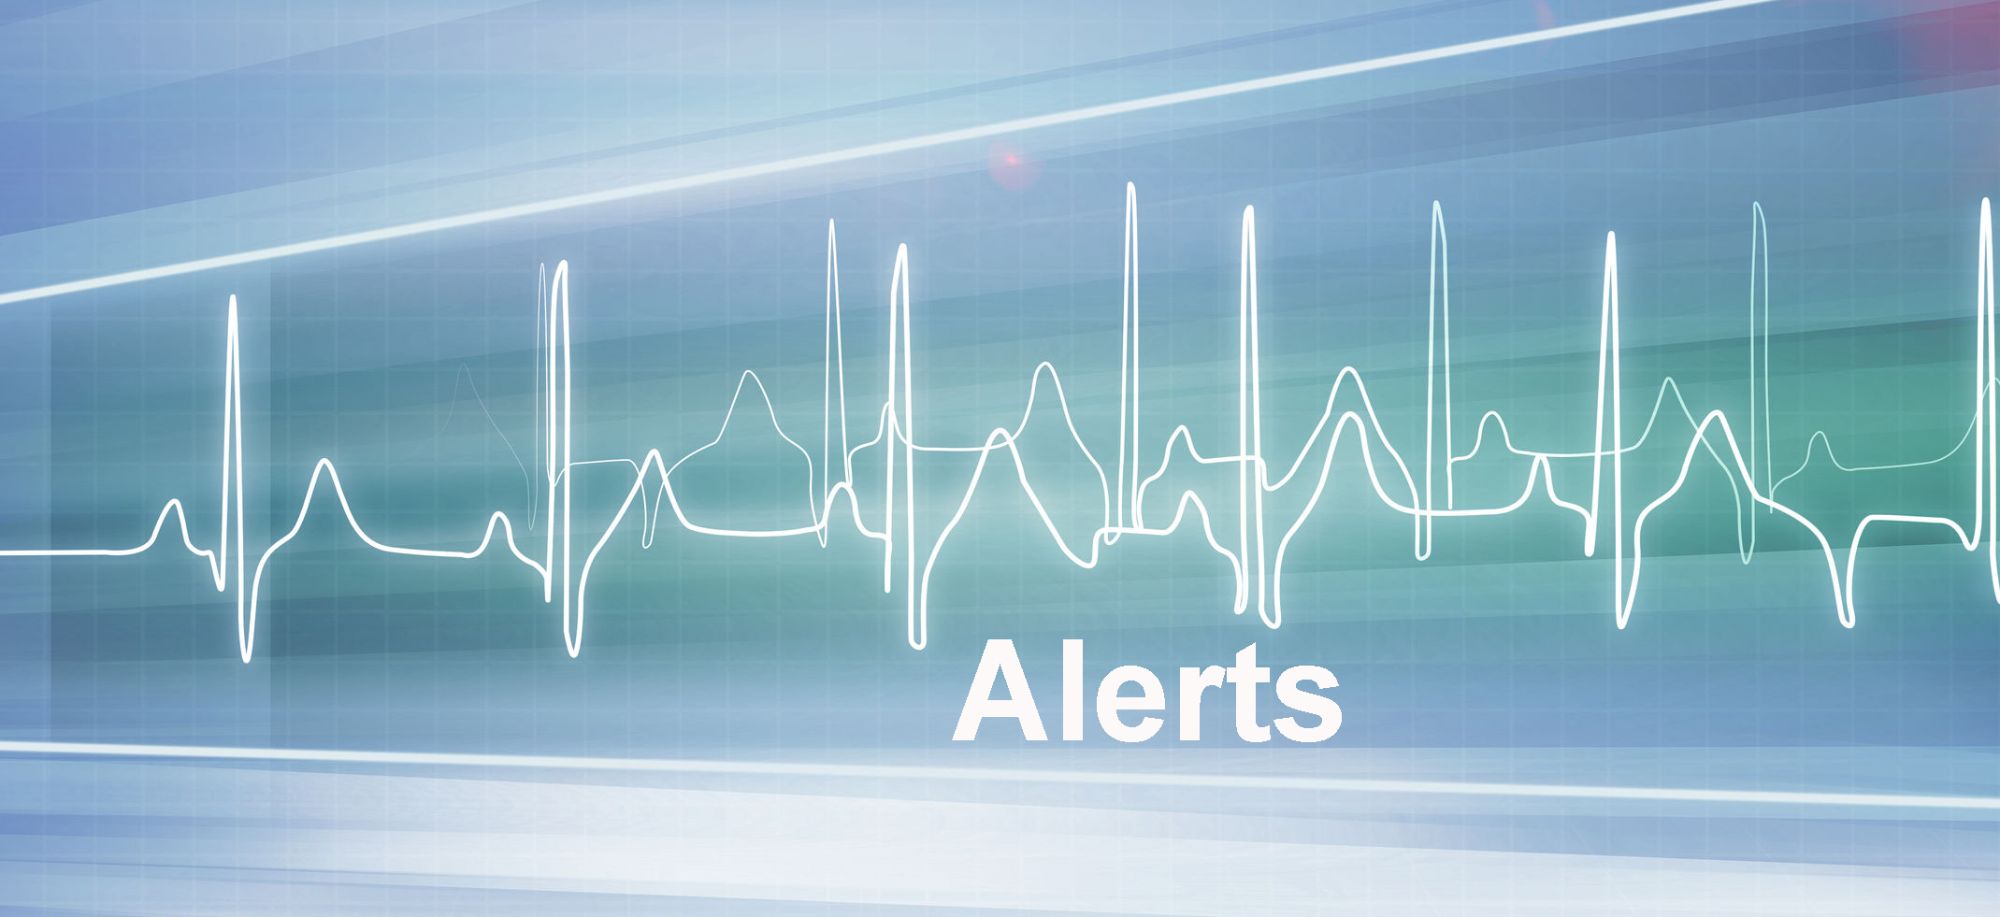 Slide Image. Vector image showing a heart trace with the word "Alerts" contractic in white